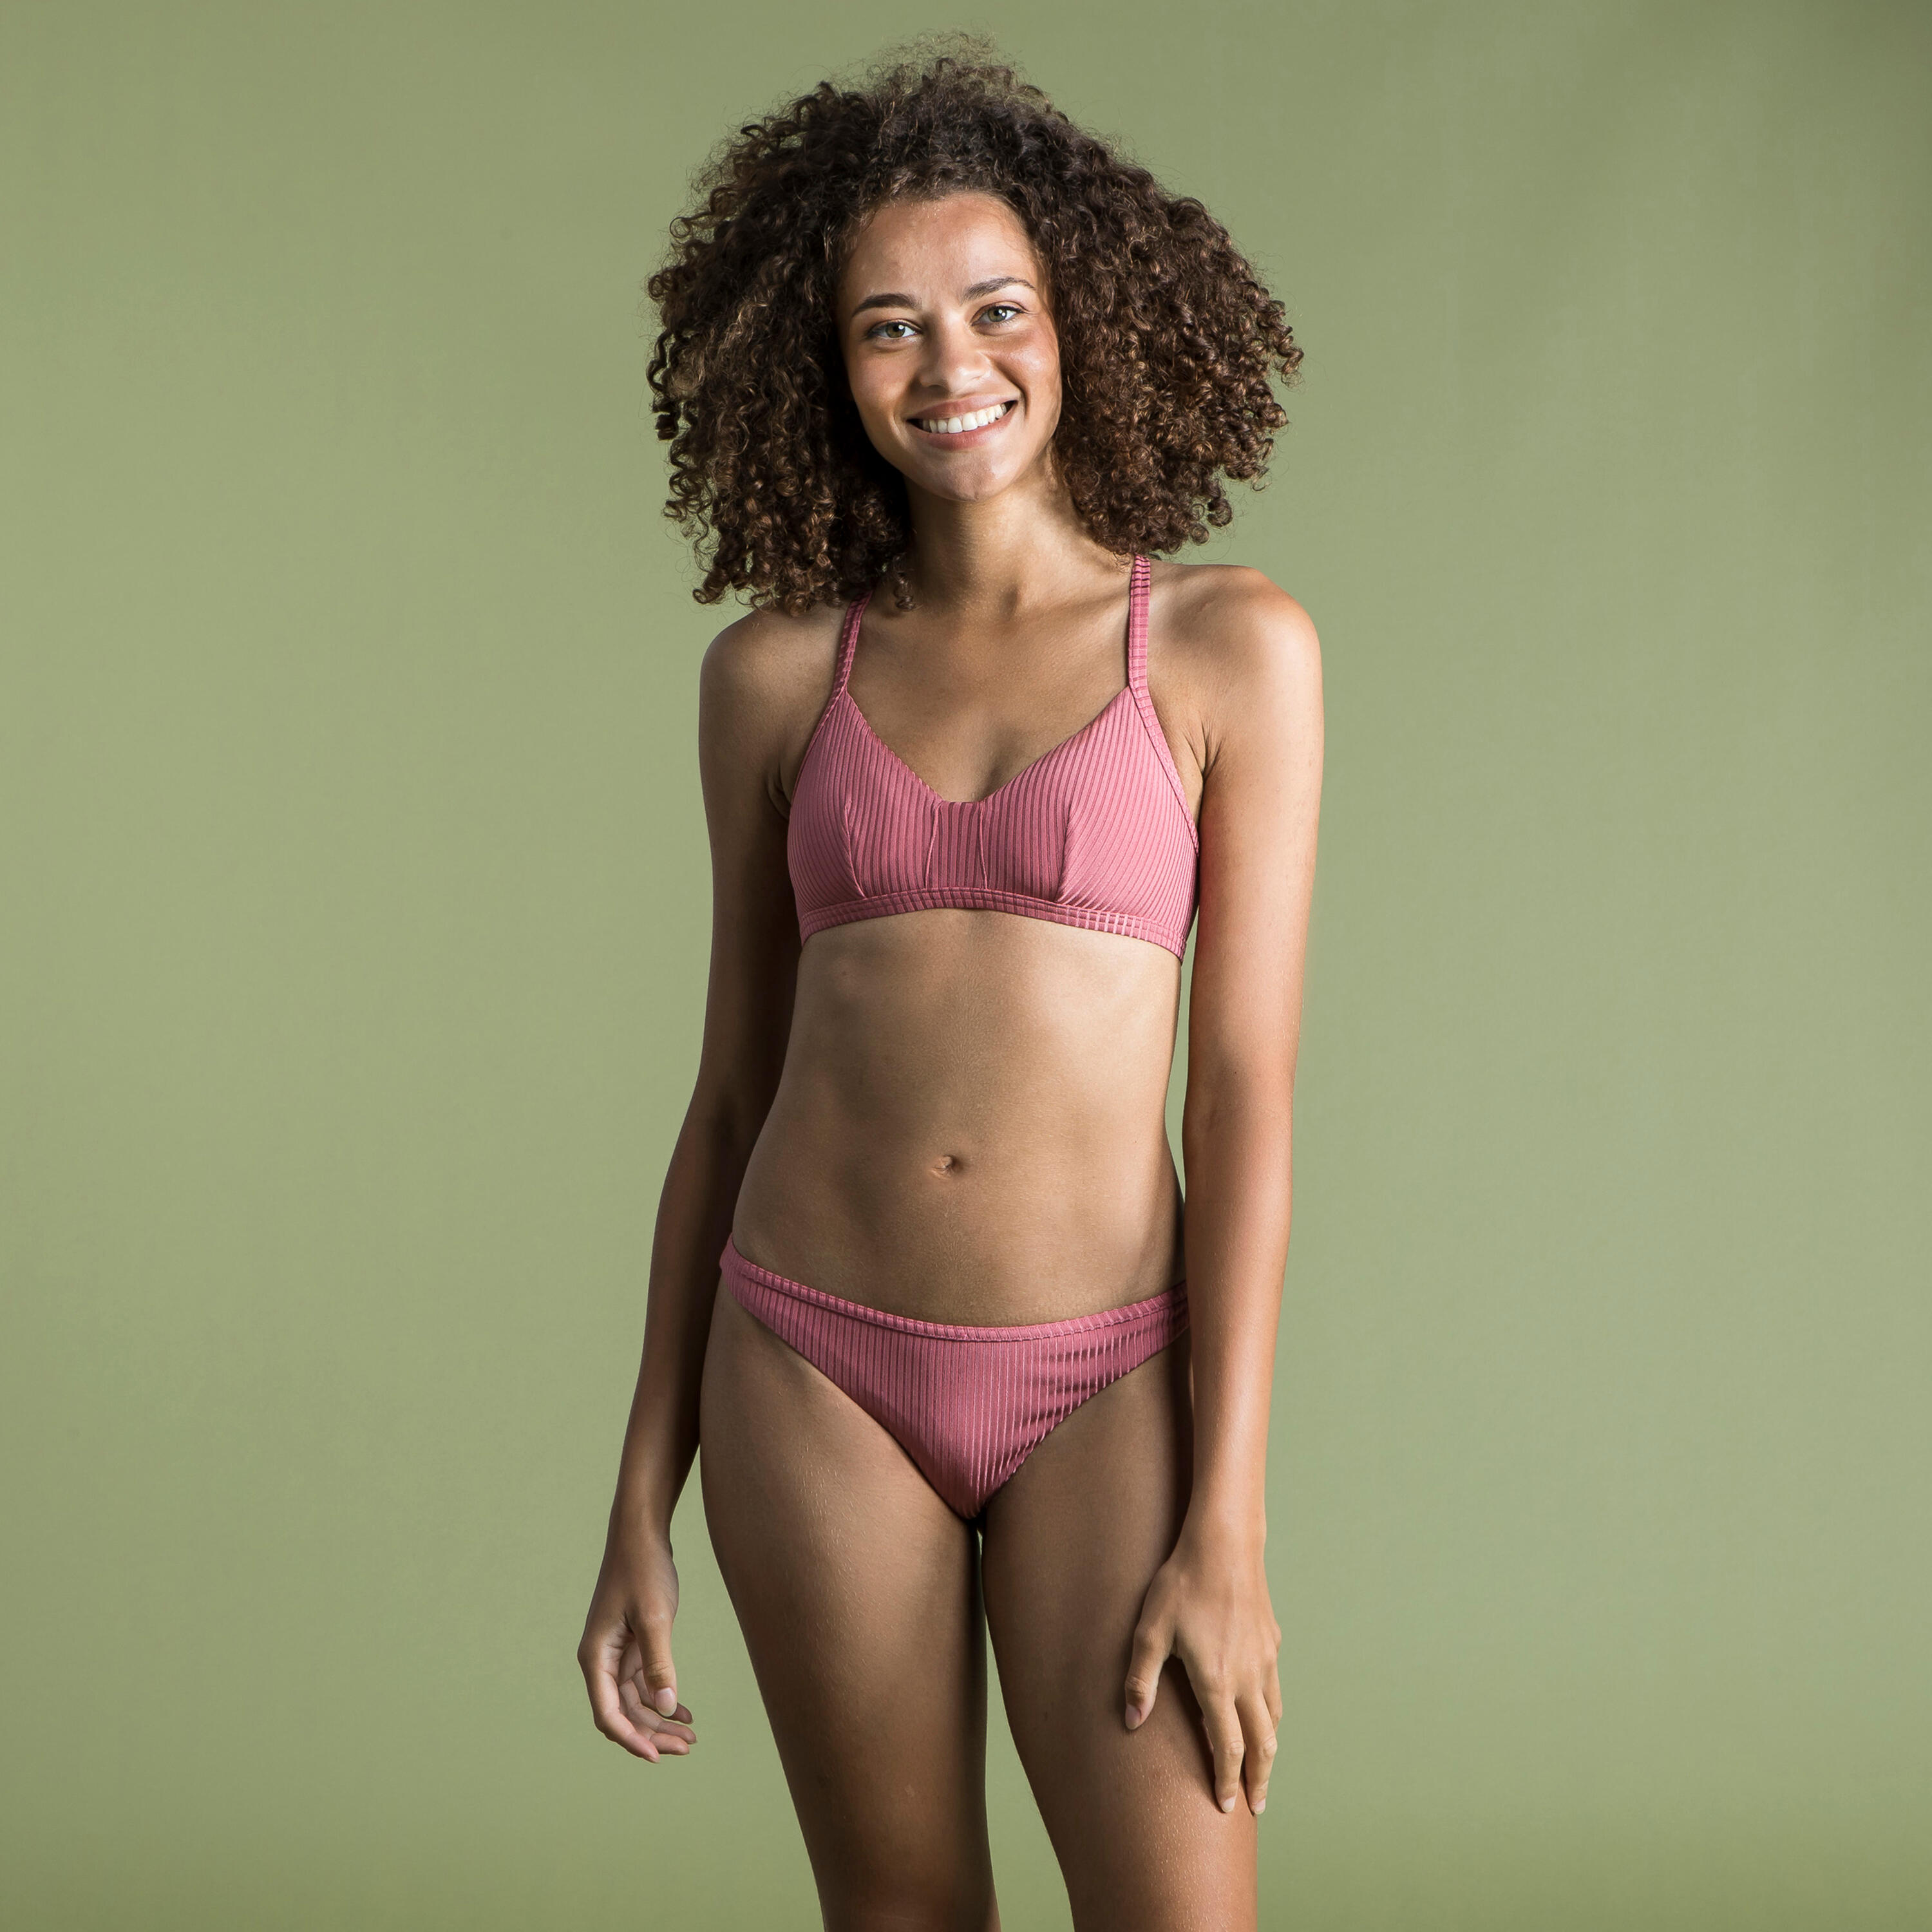 CROP TOP Swimsuit Top with Structured and Adjustable Back CARO - RIBBED PINK 8/13